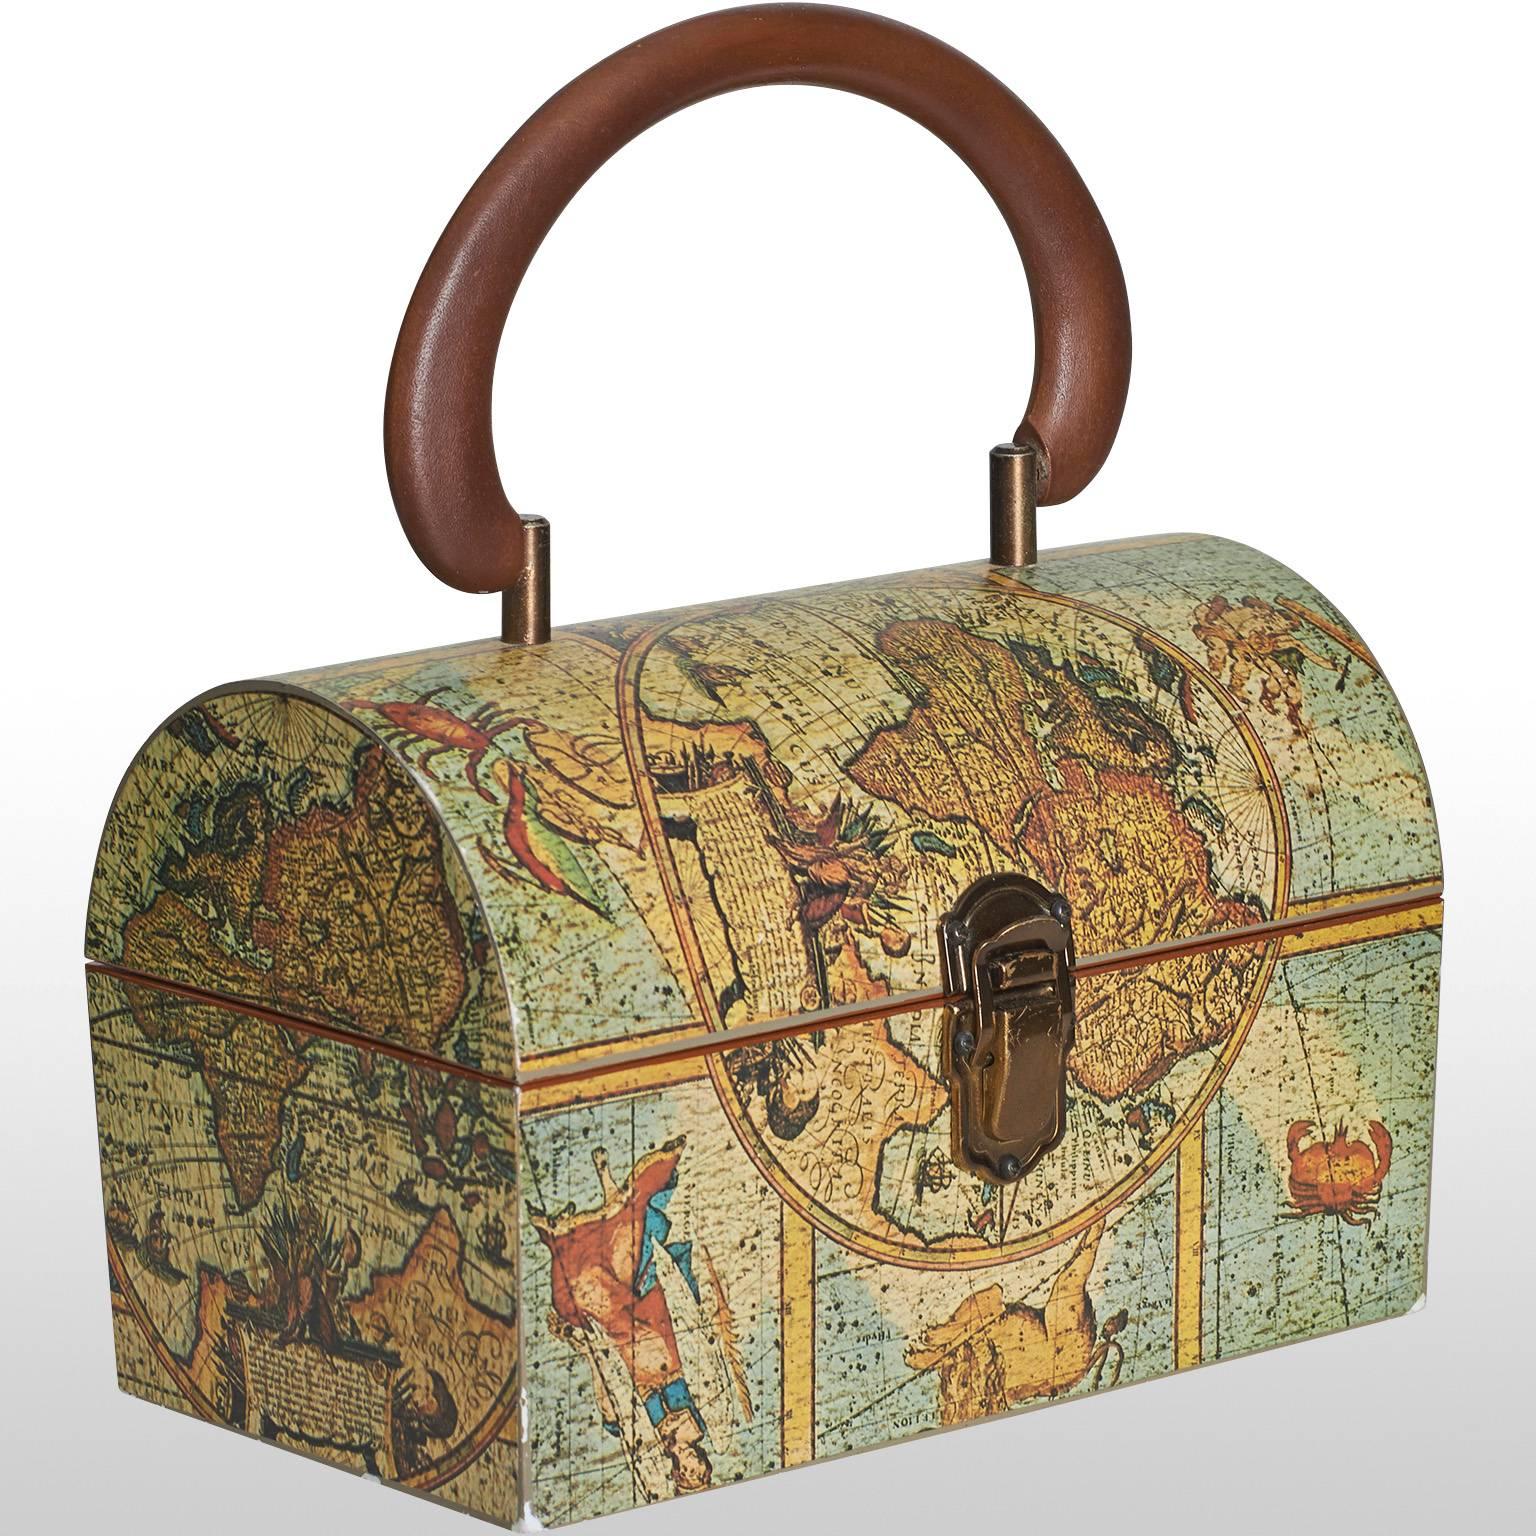 Beautiful lunchbox style bag with a quirky map print. The bag features a clasp fastening and wooden handle ideal for carrying around all day, with ample space for all your belongings.
Measurements:
Hight 9.5